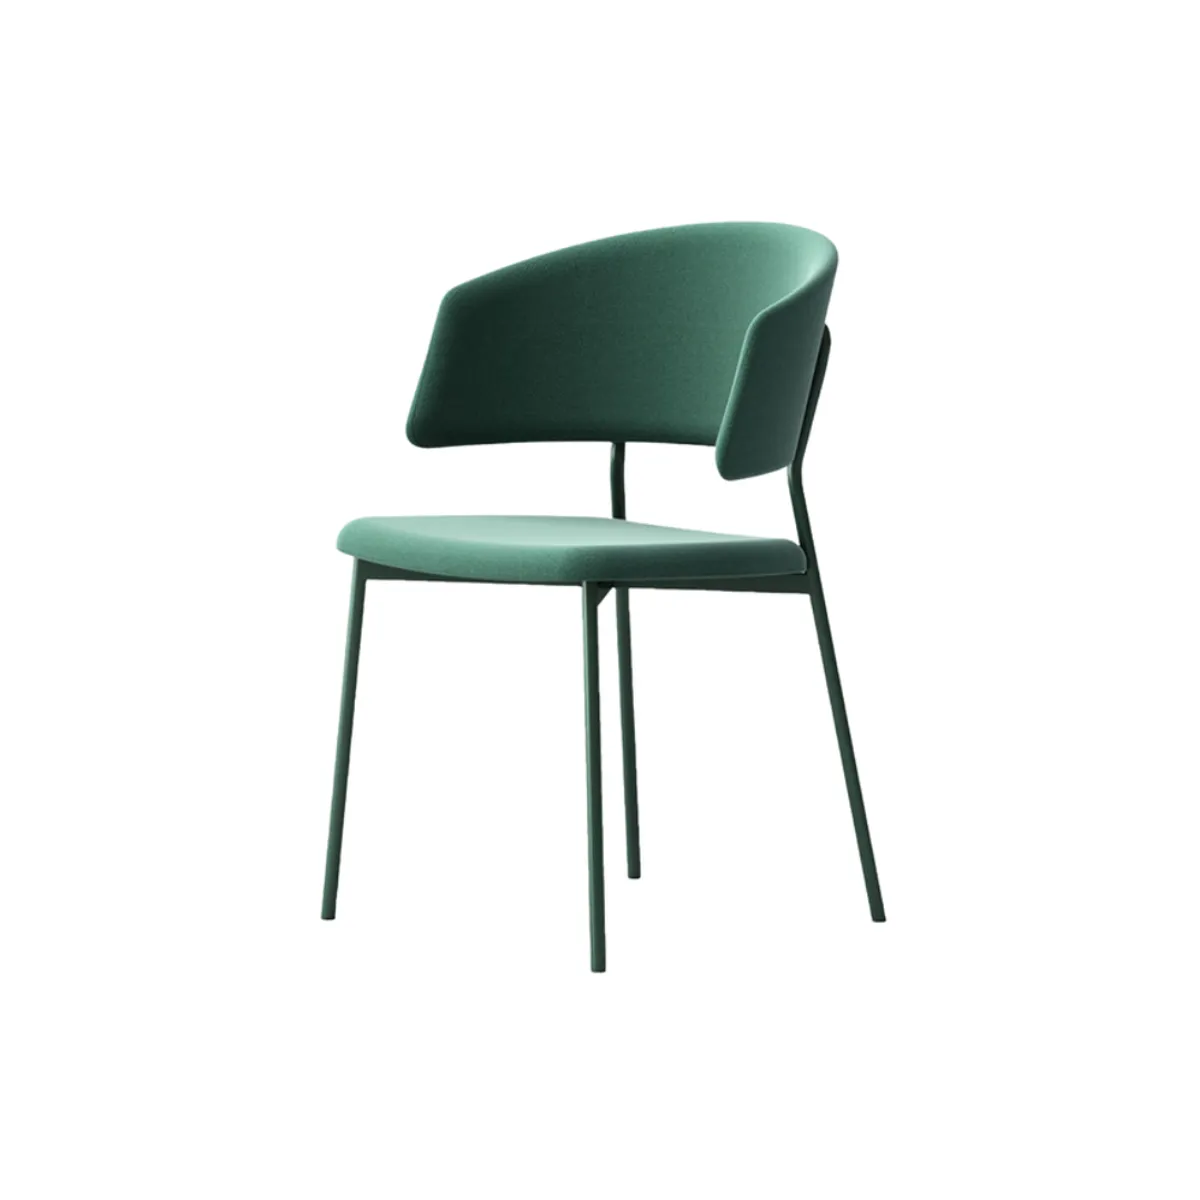 Minty curved chair 1